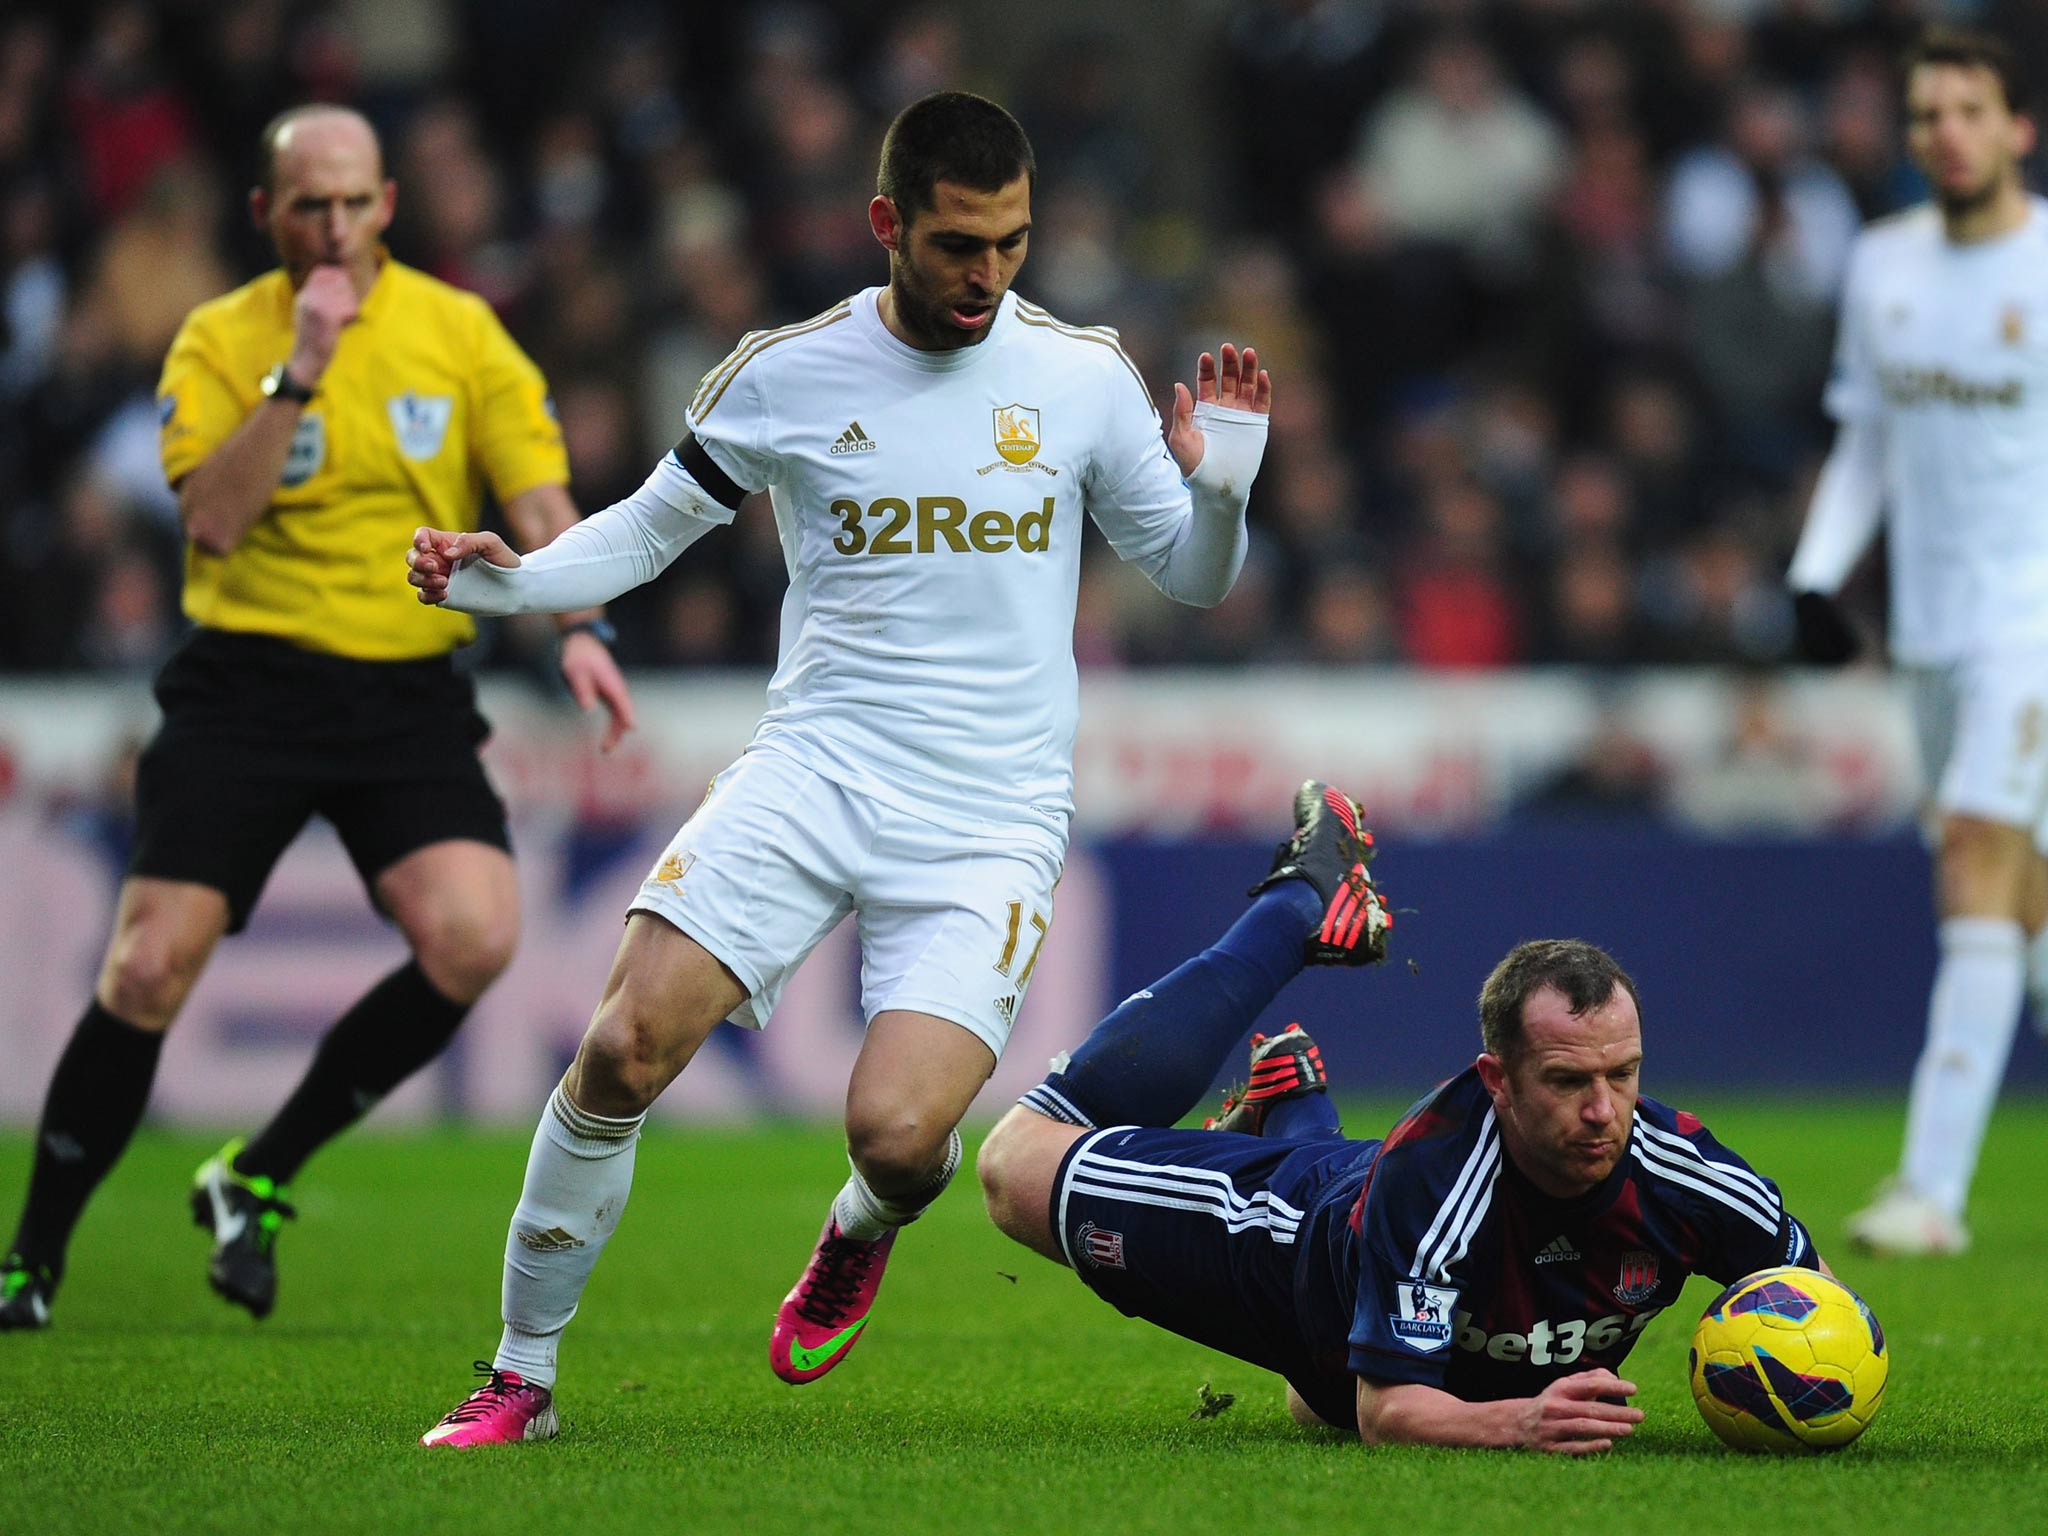 Stoke player Charlie Adam is fouled by Swansea player Itay Schechter